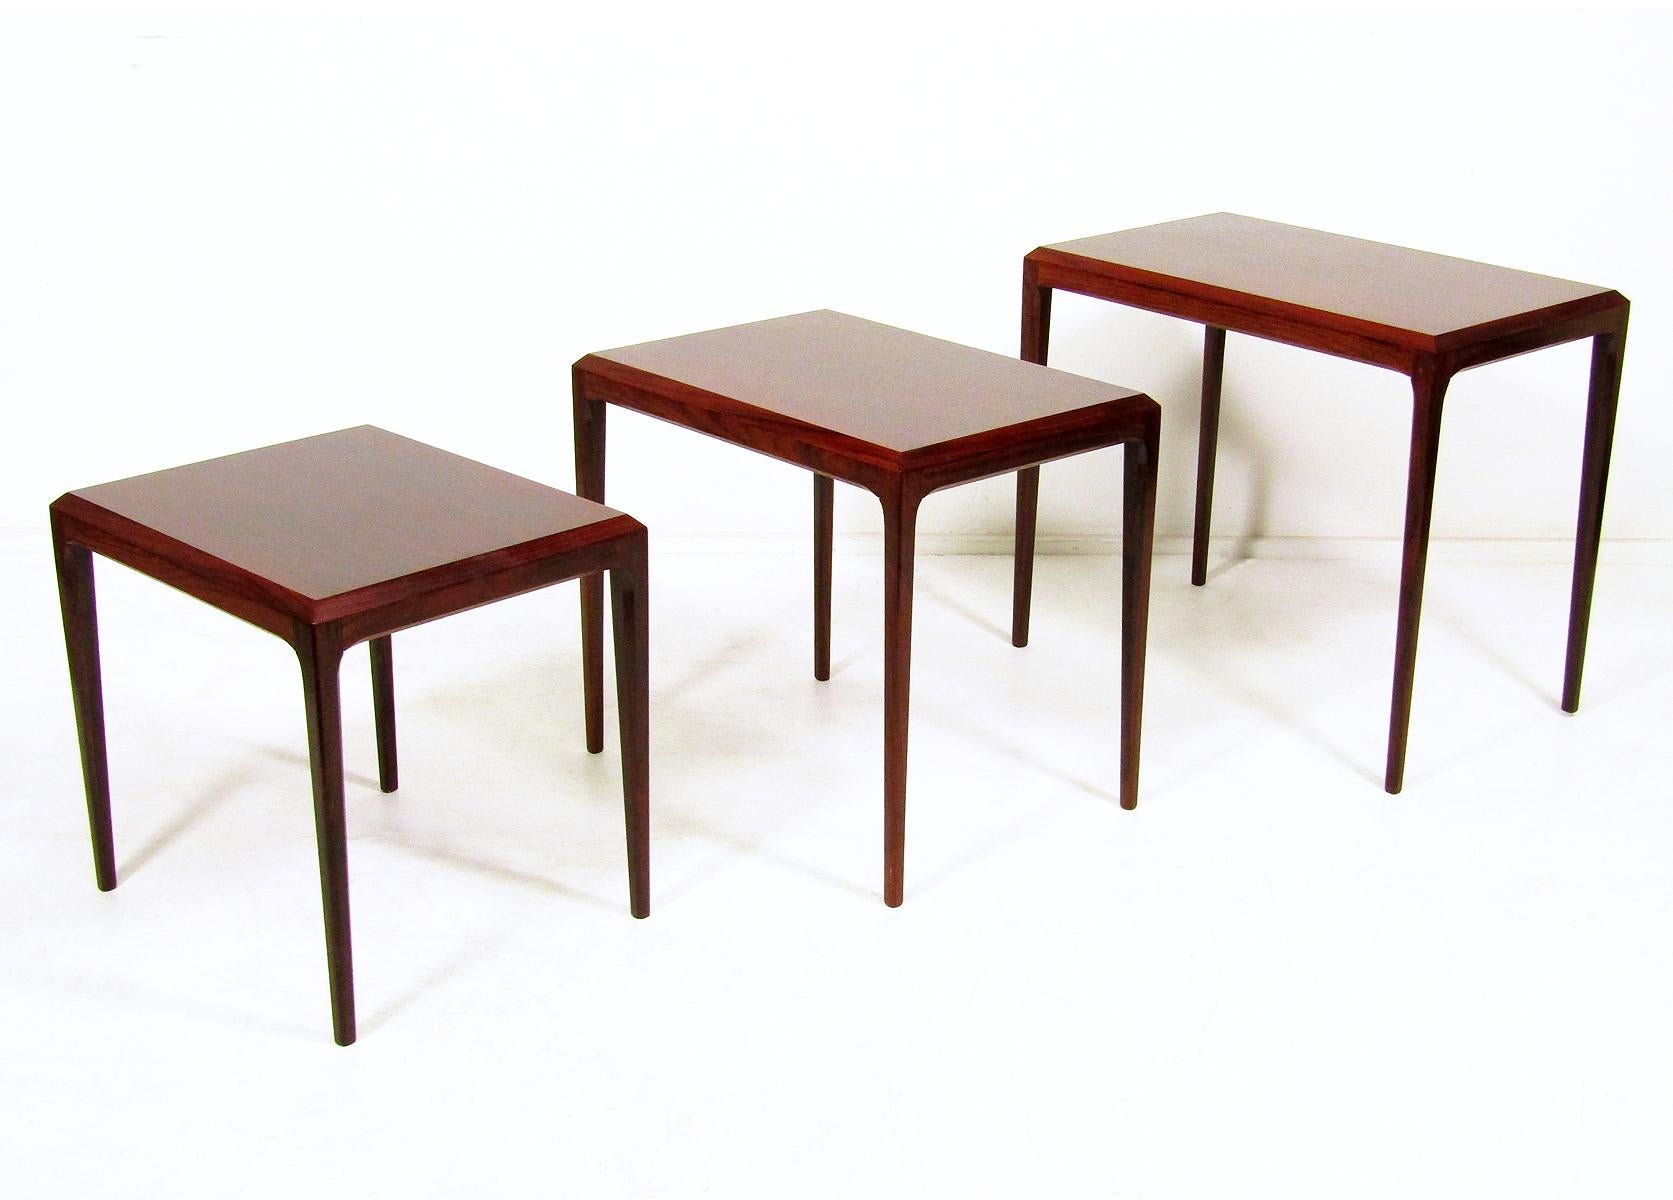 A set of three early 1960s nesting tables in rosewood by Danish designer Johannes Andersen for CFC Silkeborg.

With fine proportions, tapered legs and sculpted contours these tables showcase Andersen's inimitable craftsmanship.

The rosewood